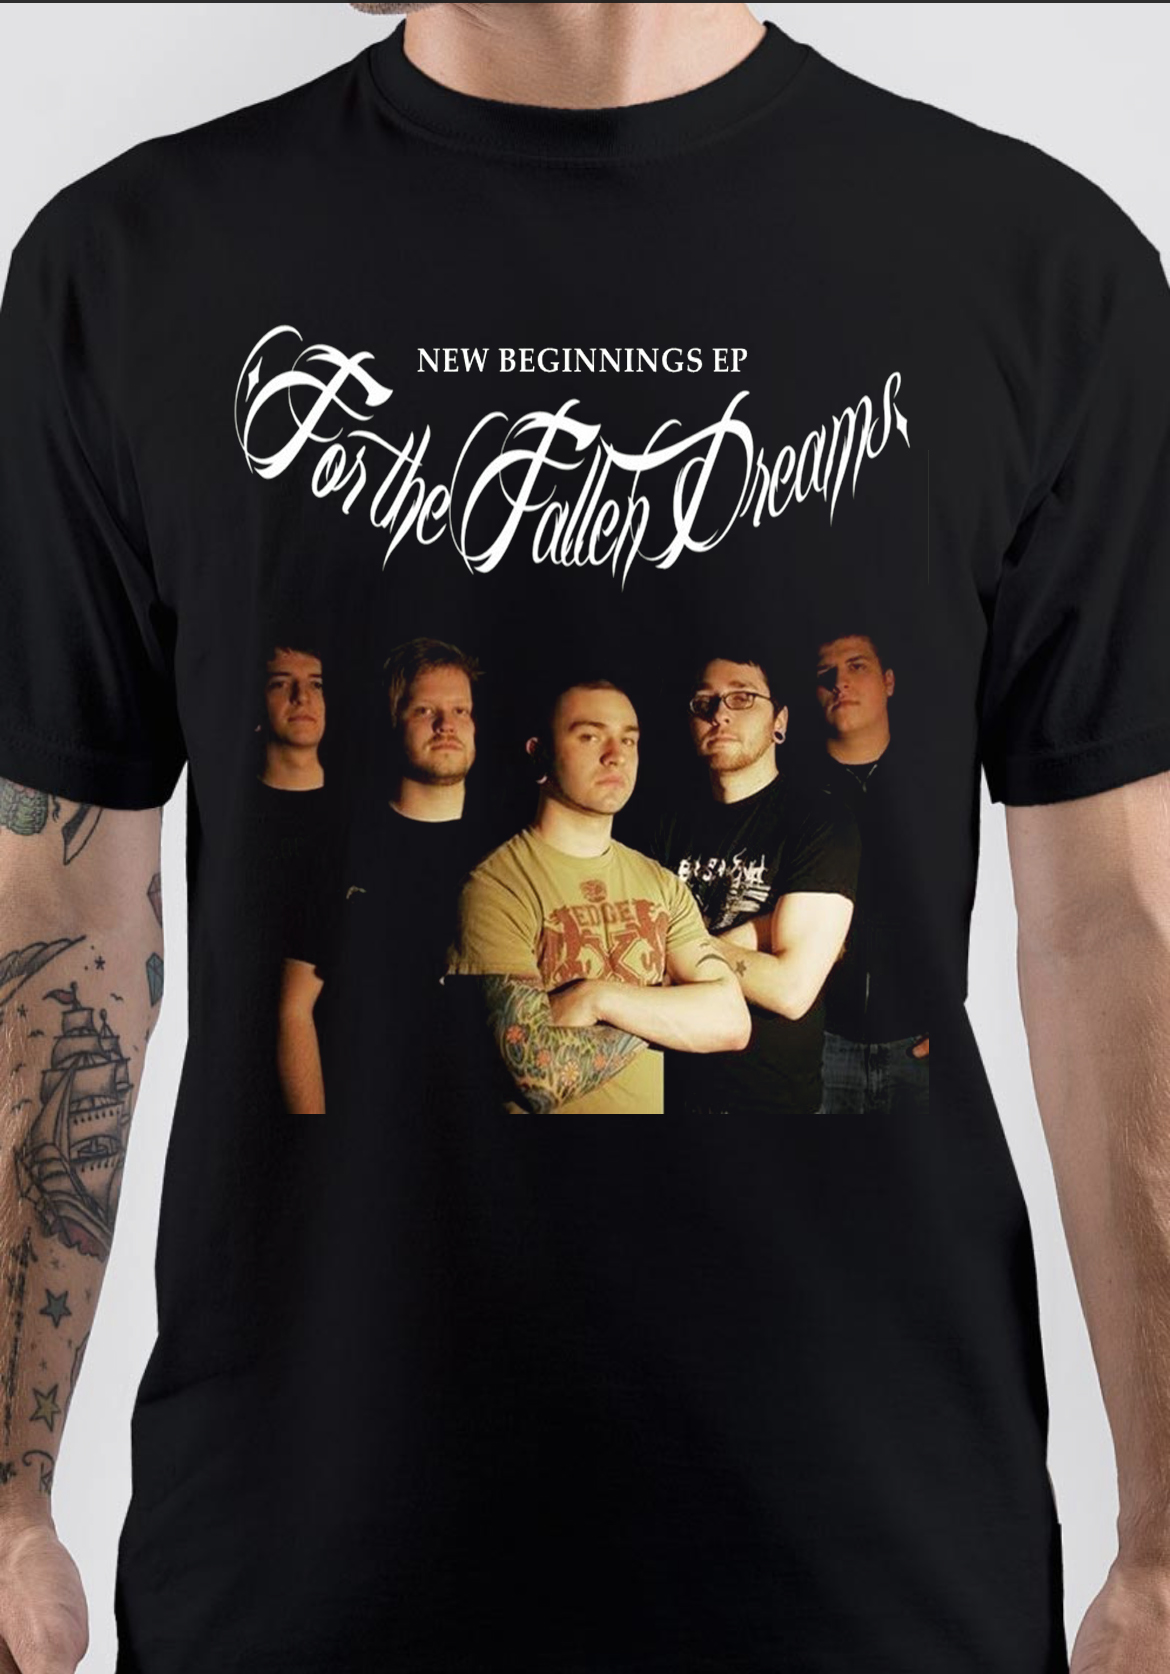 For The Fallen Dreams T-Shirt And Merchandise